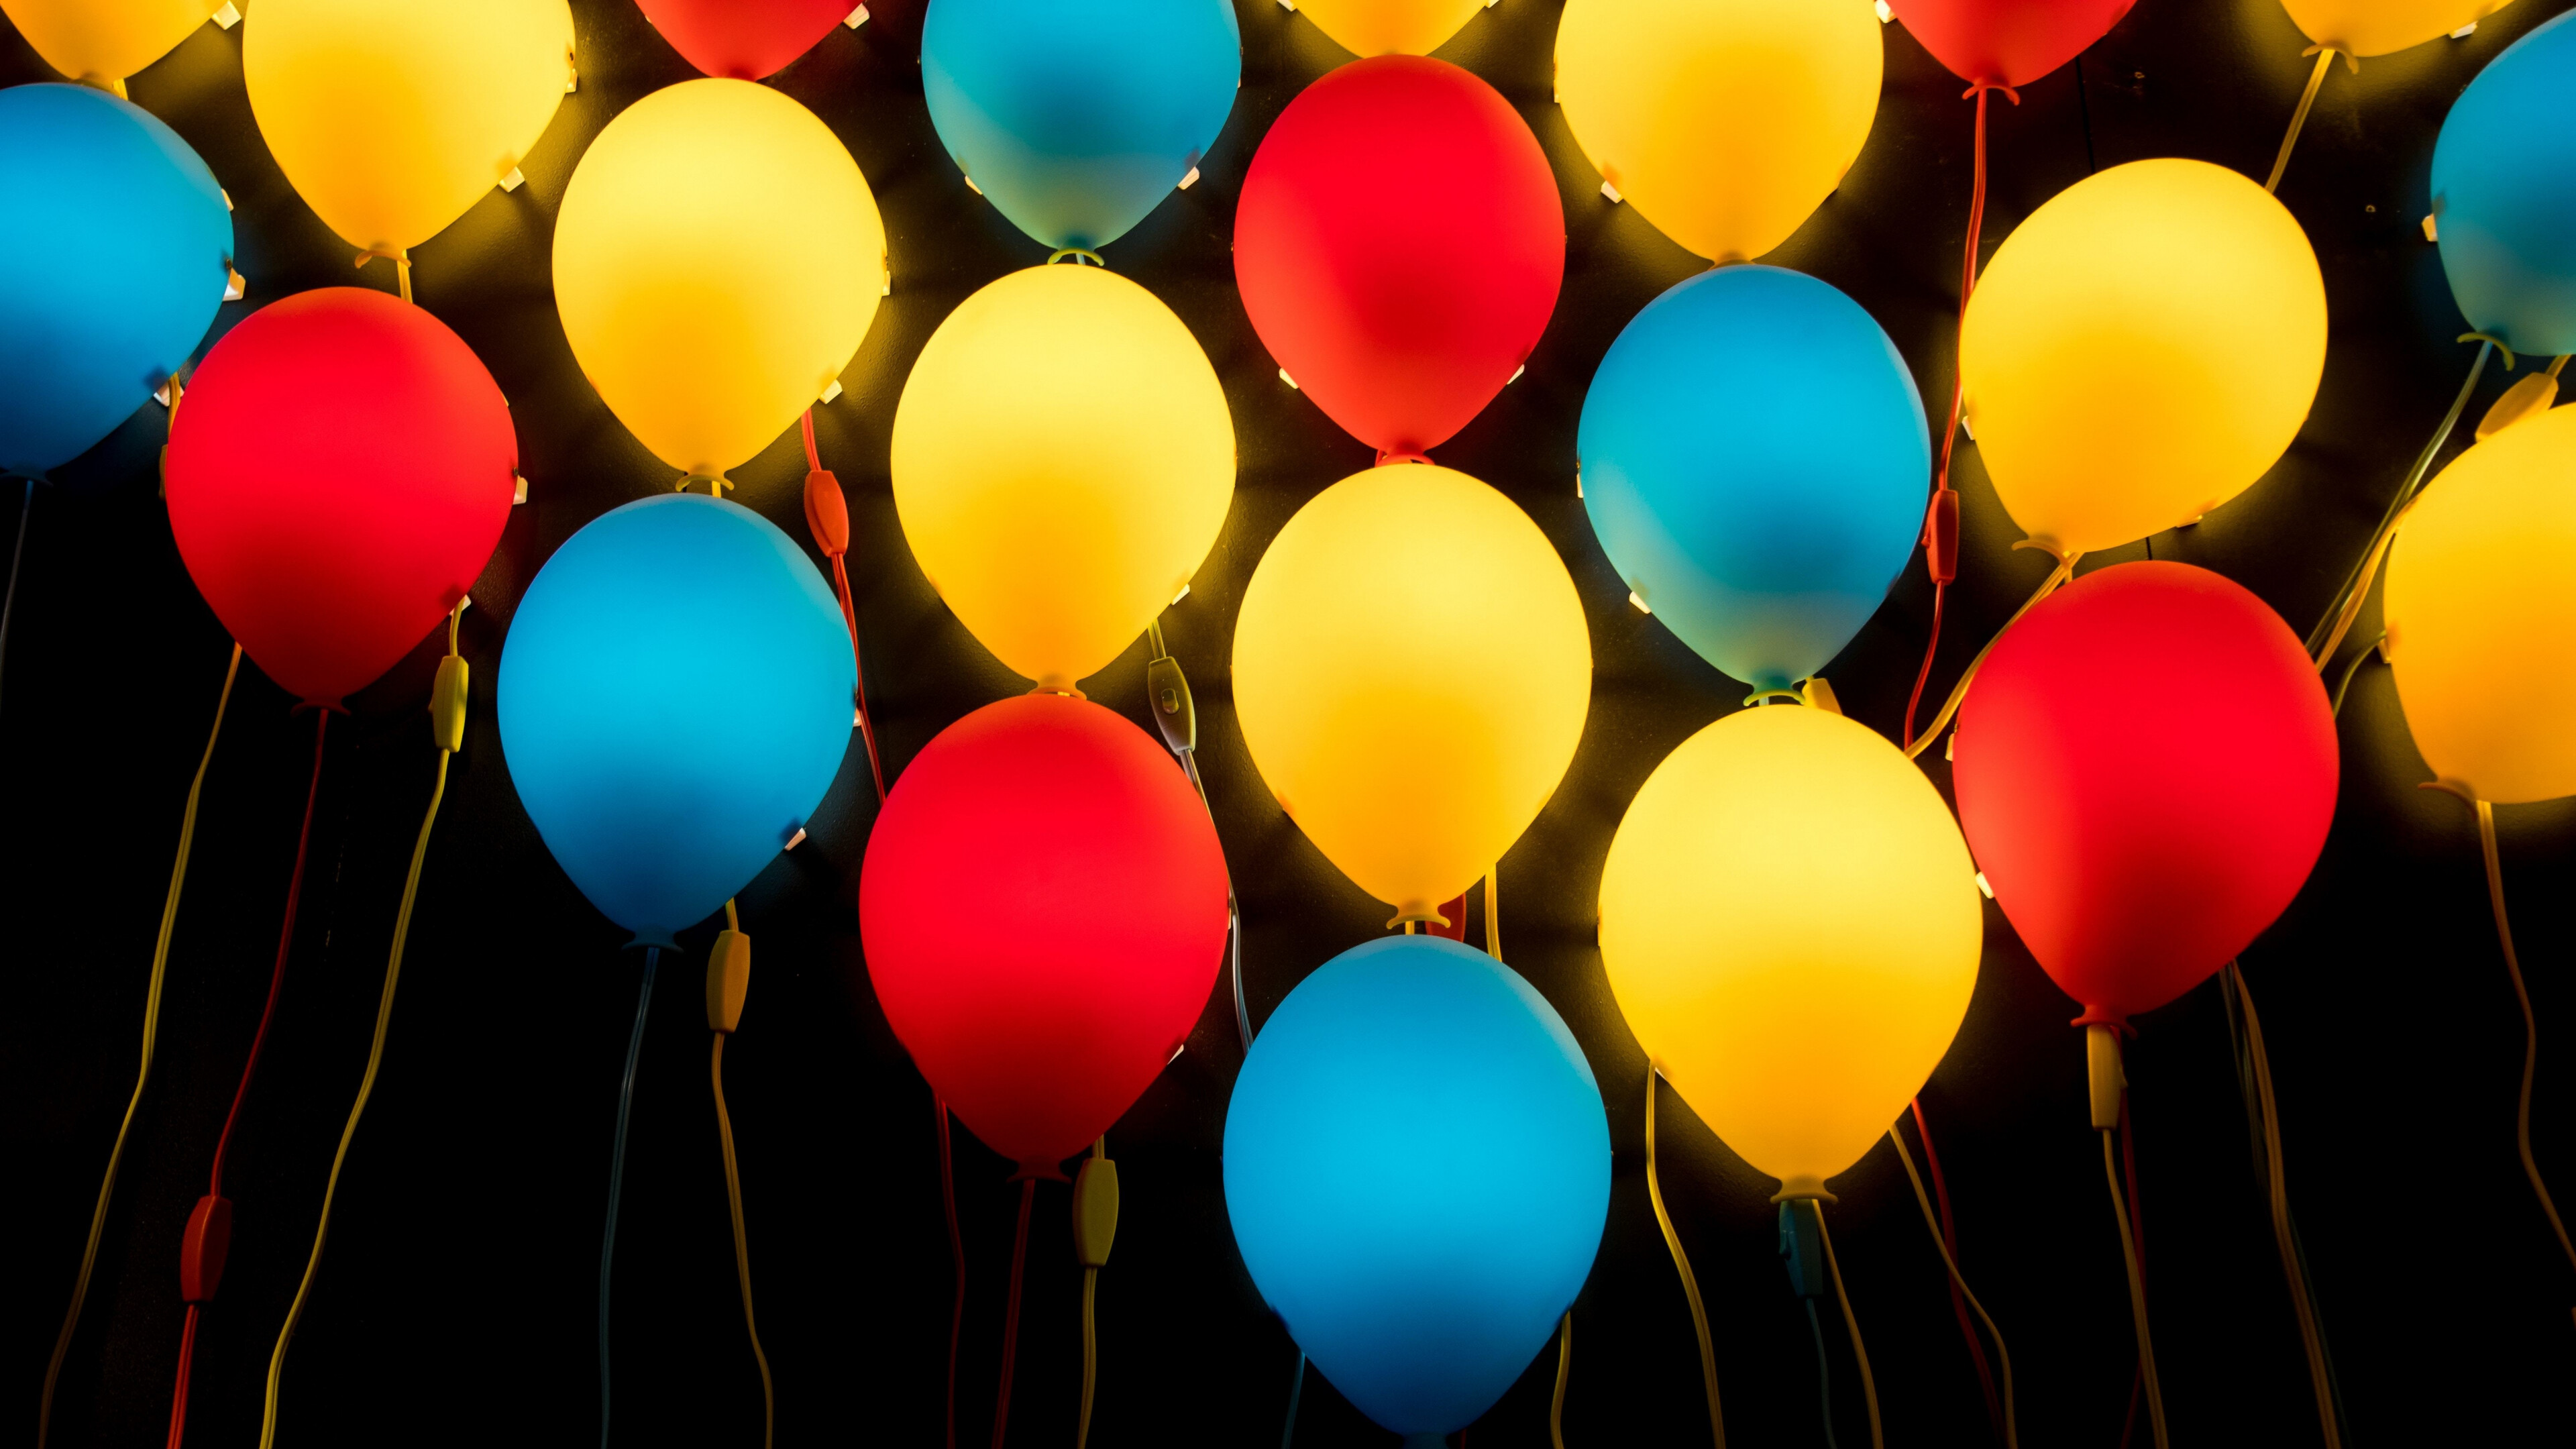 Balloons: Colorful, Can be inflated with helium, hydrogen, nitrous oxide, oxygen, and air. 3840x2160 4K Wallpaper.